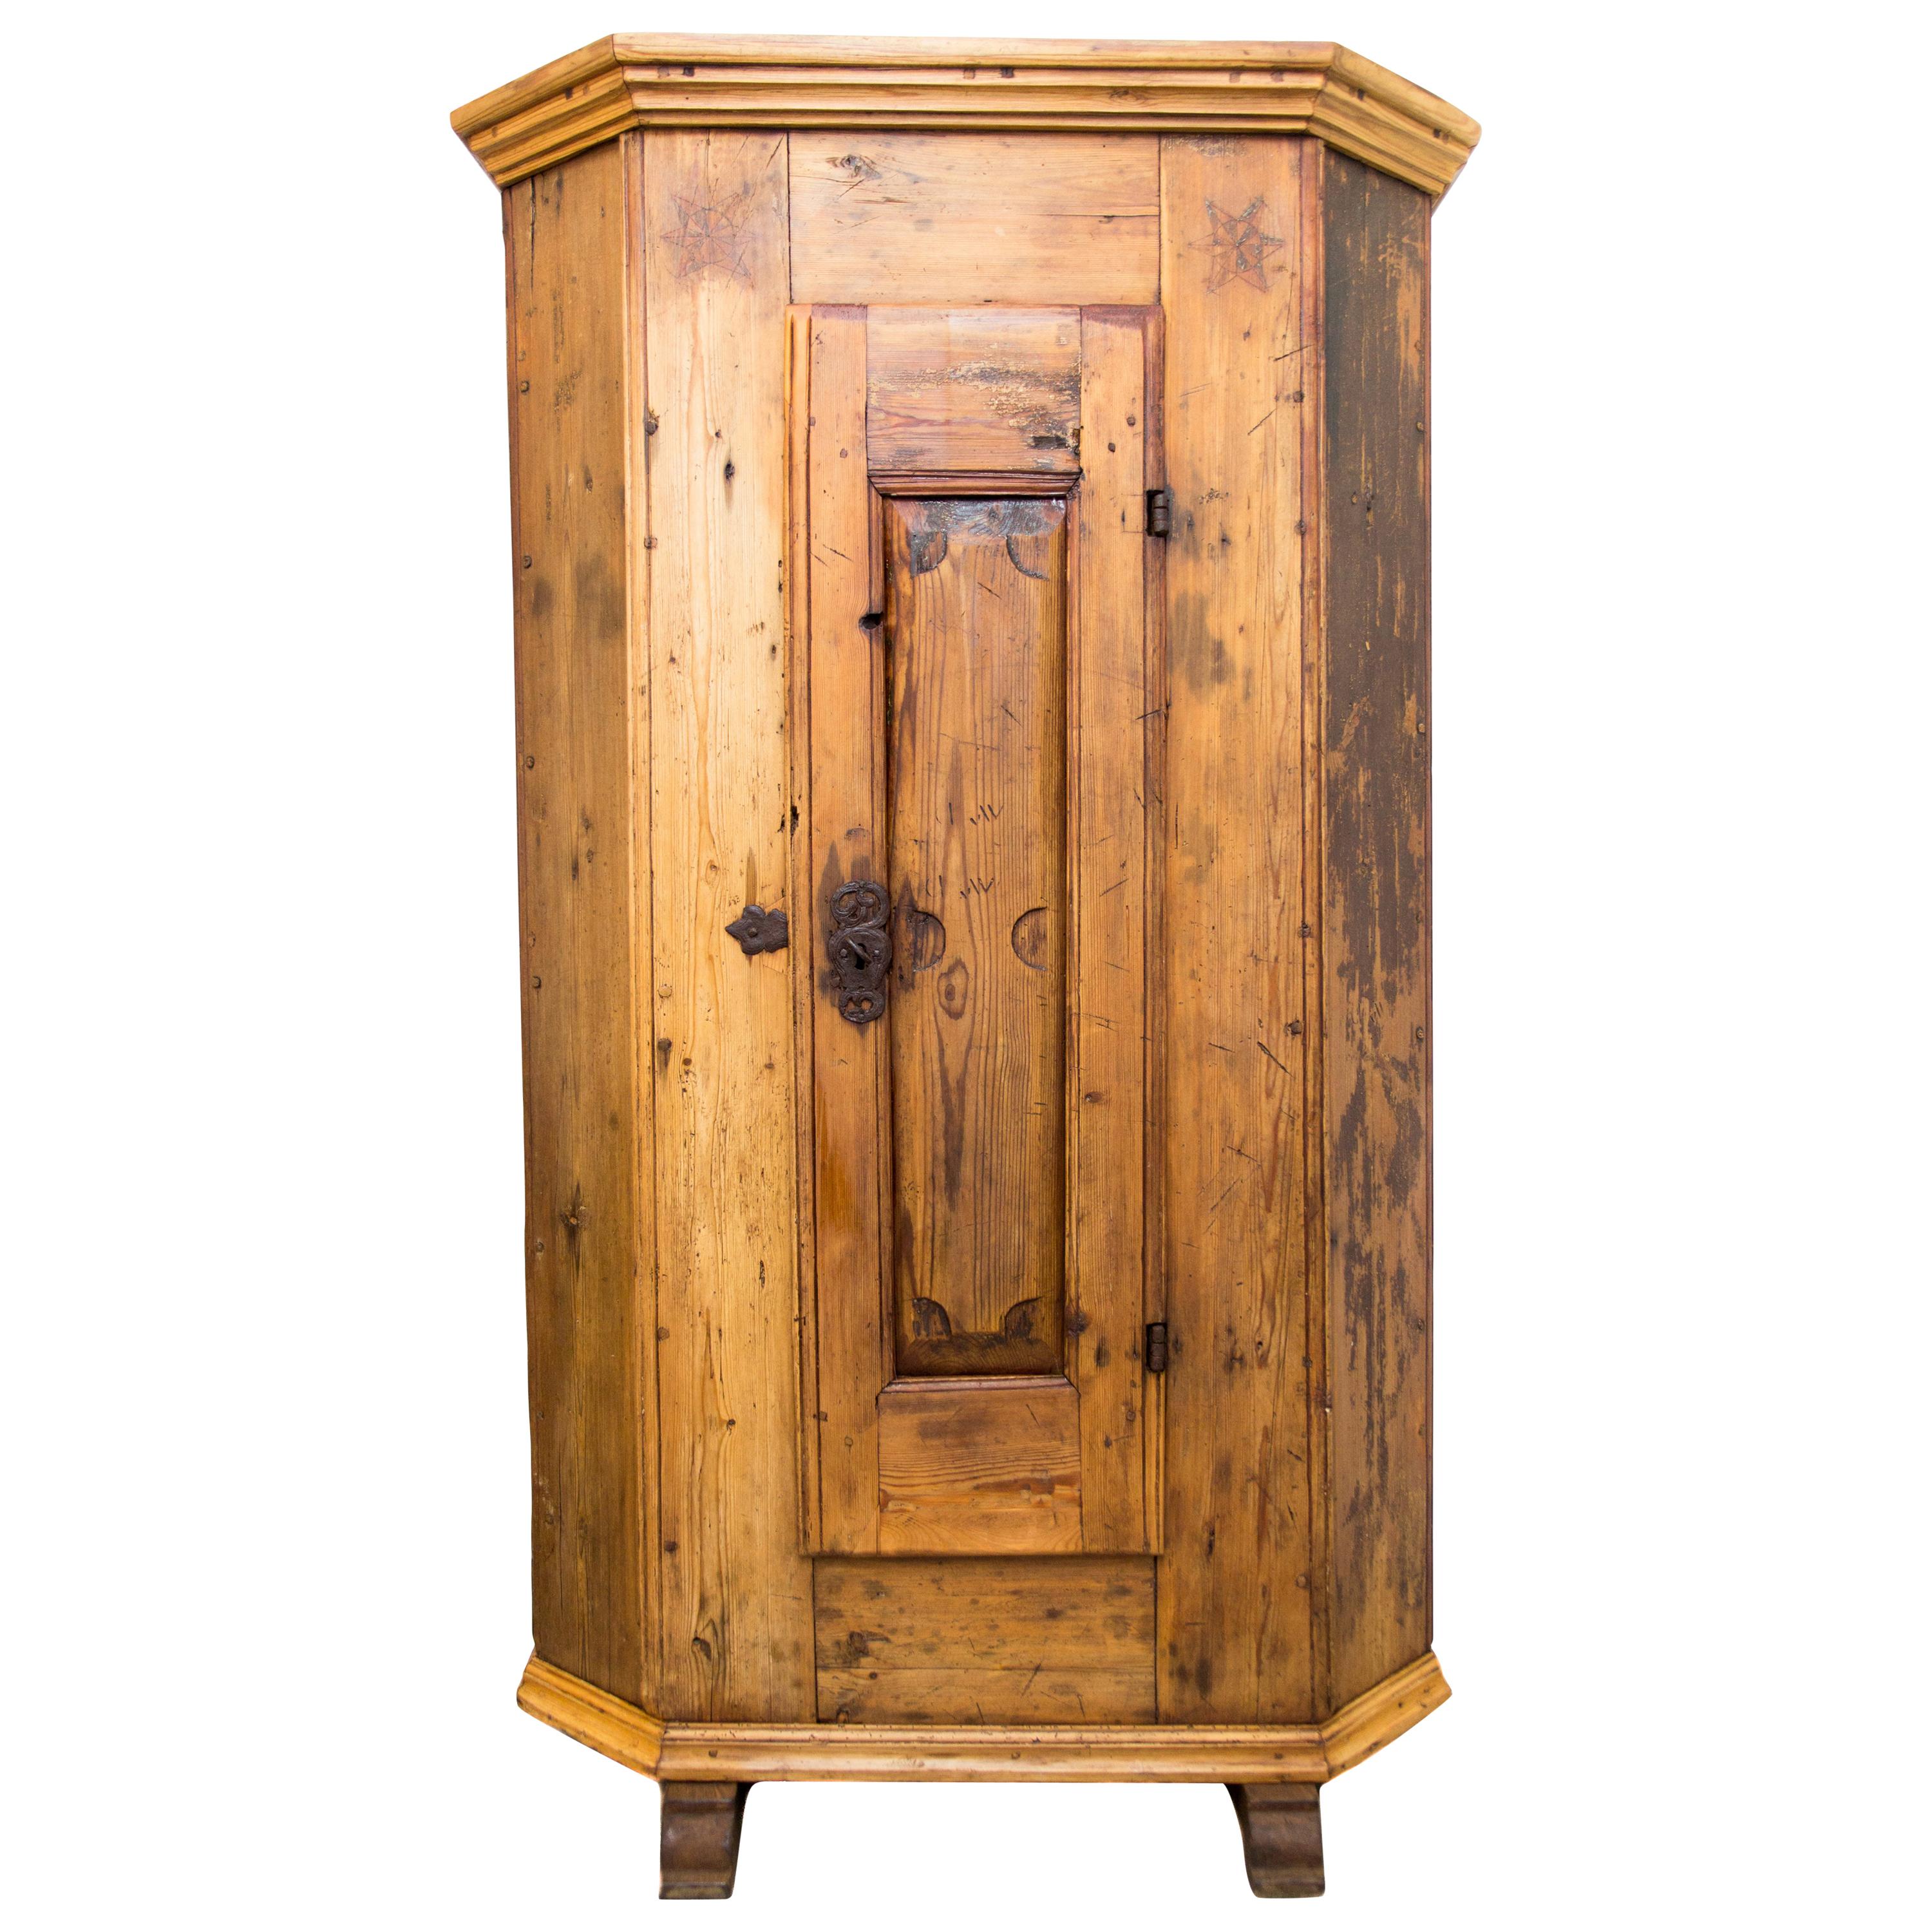 Antique One-Door Baltic Pine Wood and Iron Handmade Armoire, dated 1830 For Sale